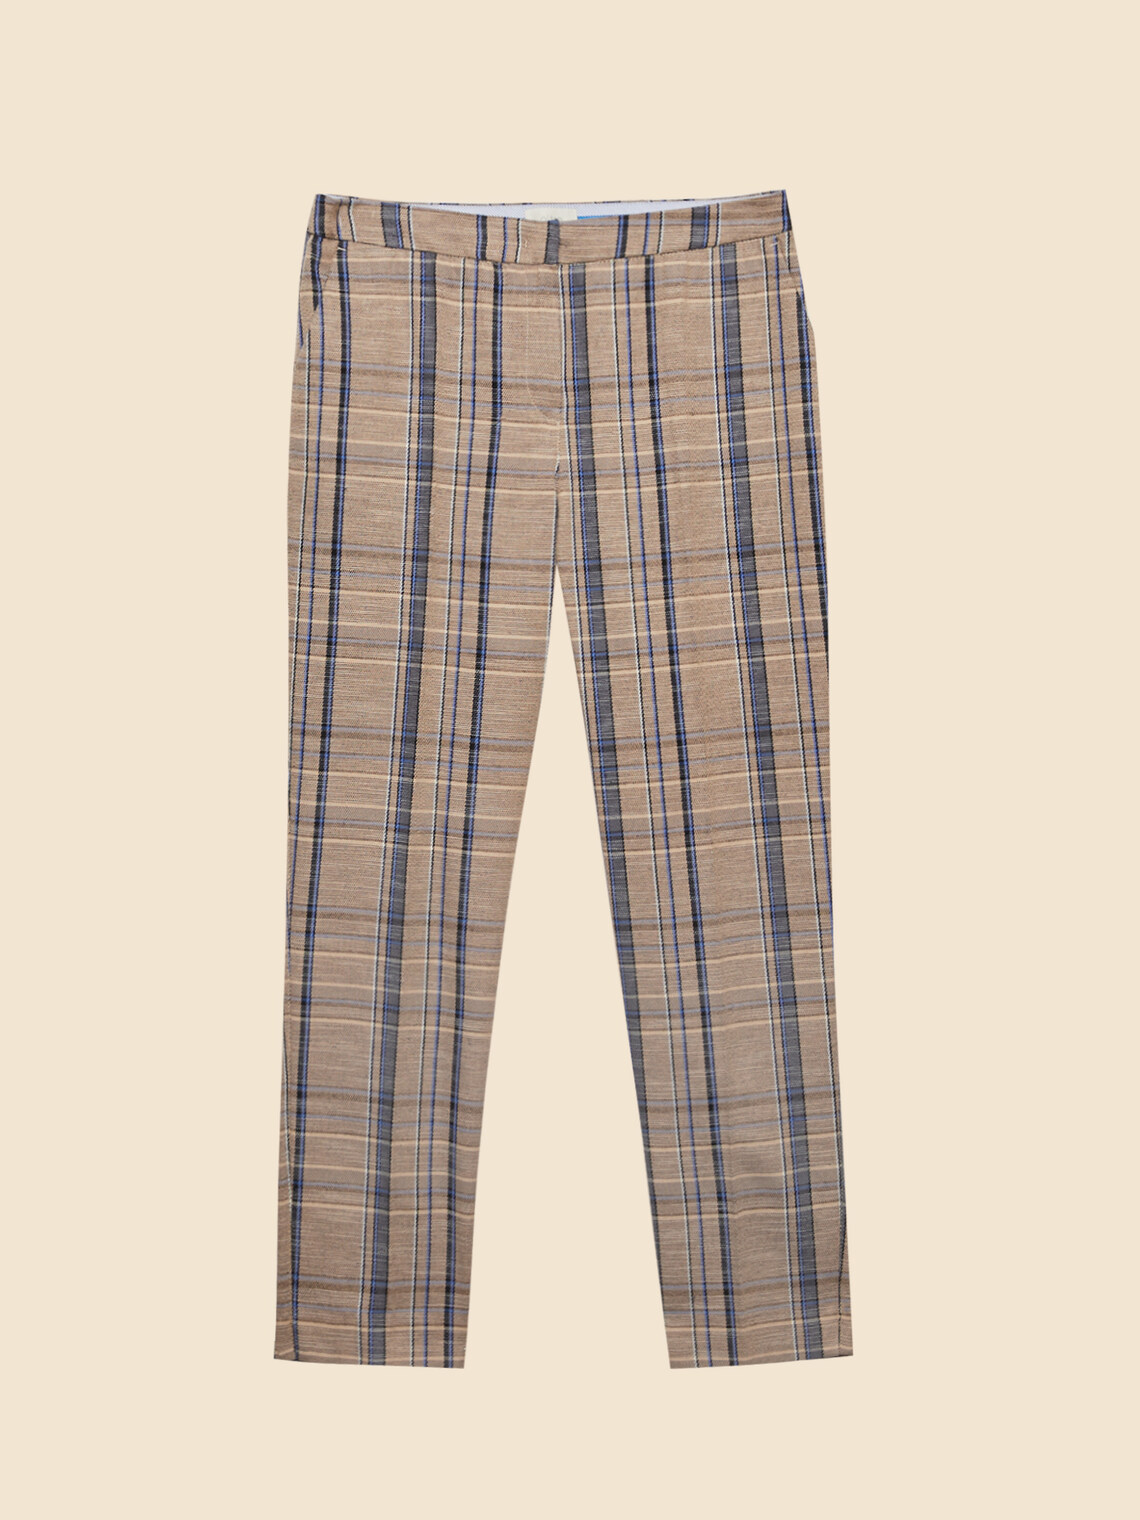 Chequered stovepipe trousers - Oltre.com - GB